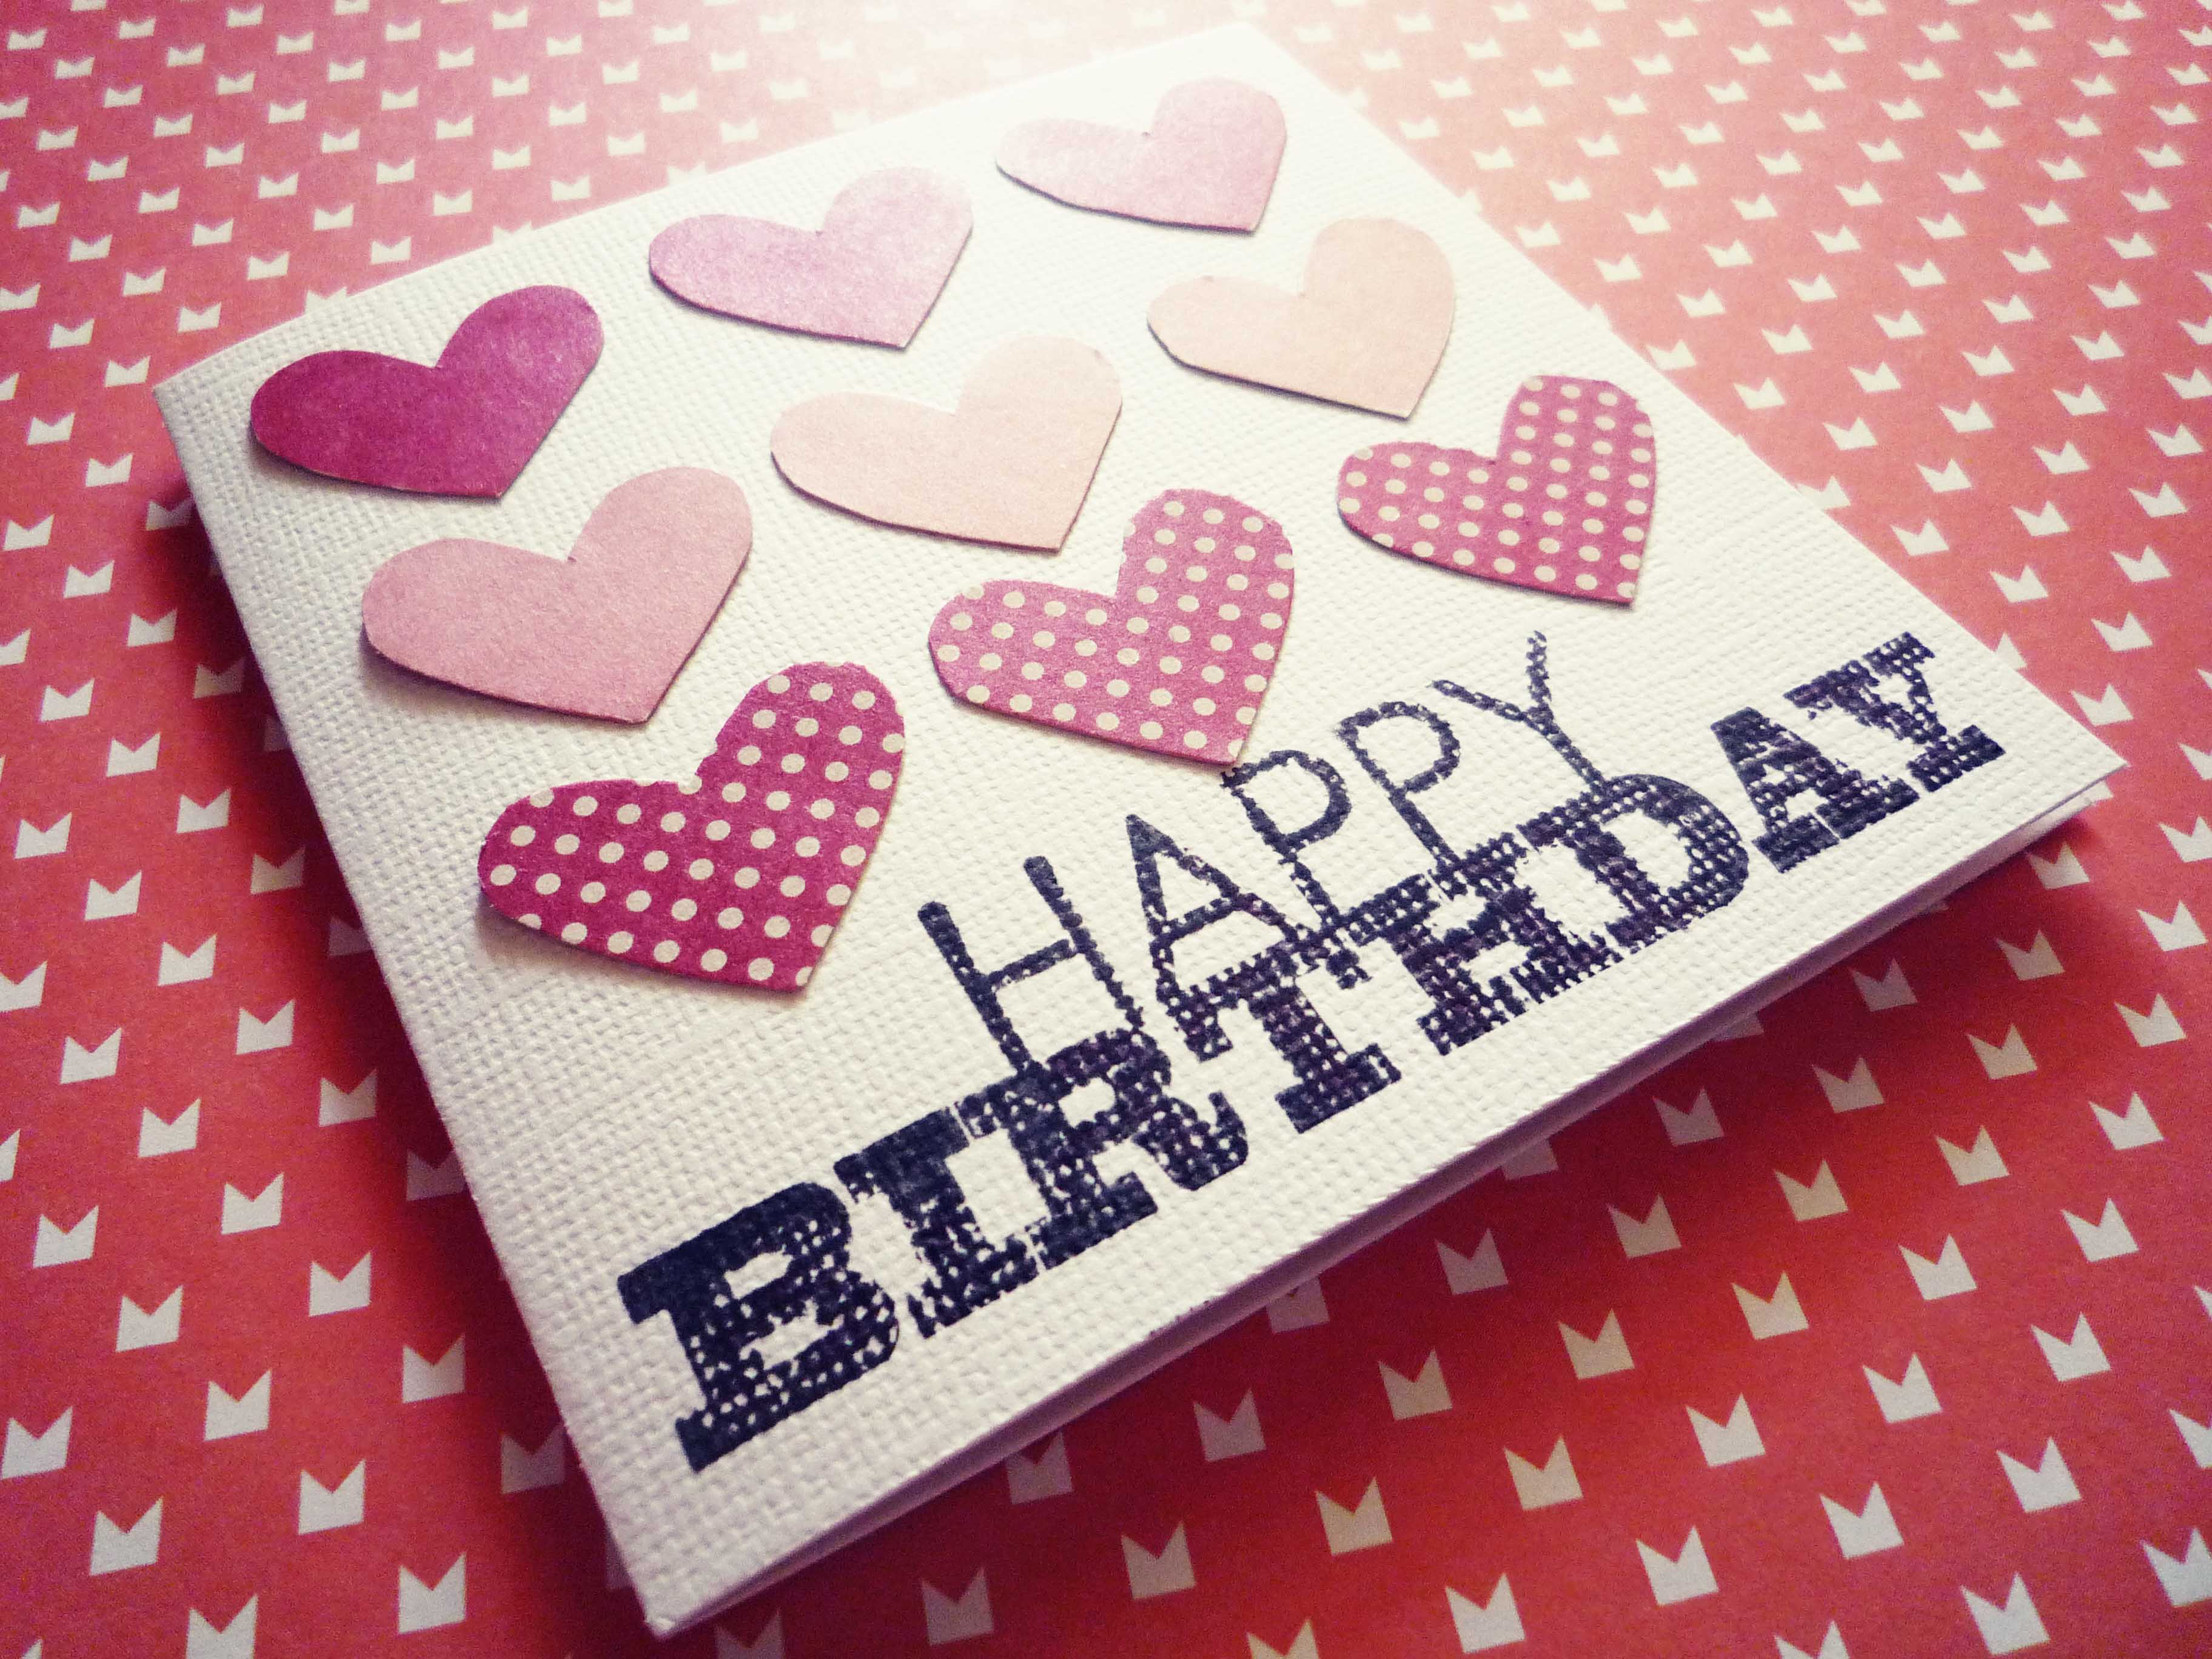 10-lovely-birthday-cards-to-send-to-your-girlfriend-on-her-birthday-1